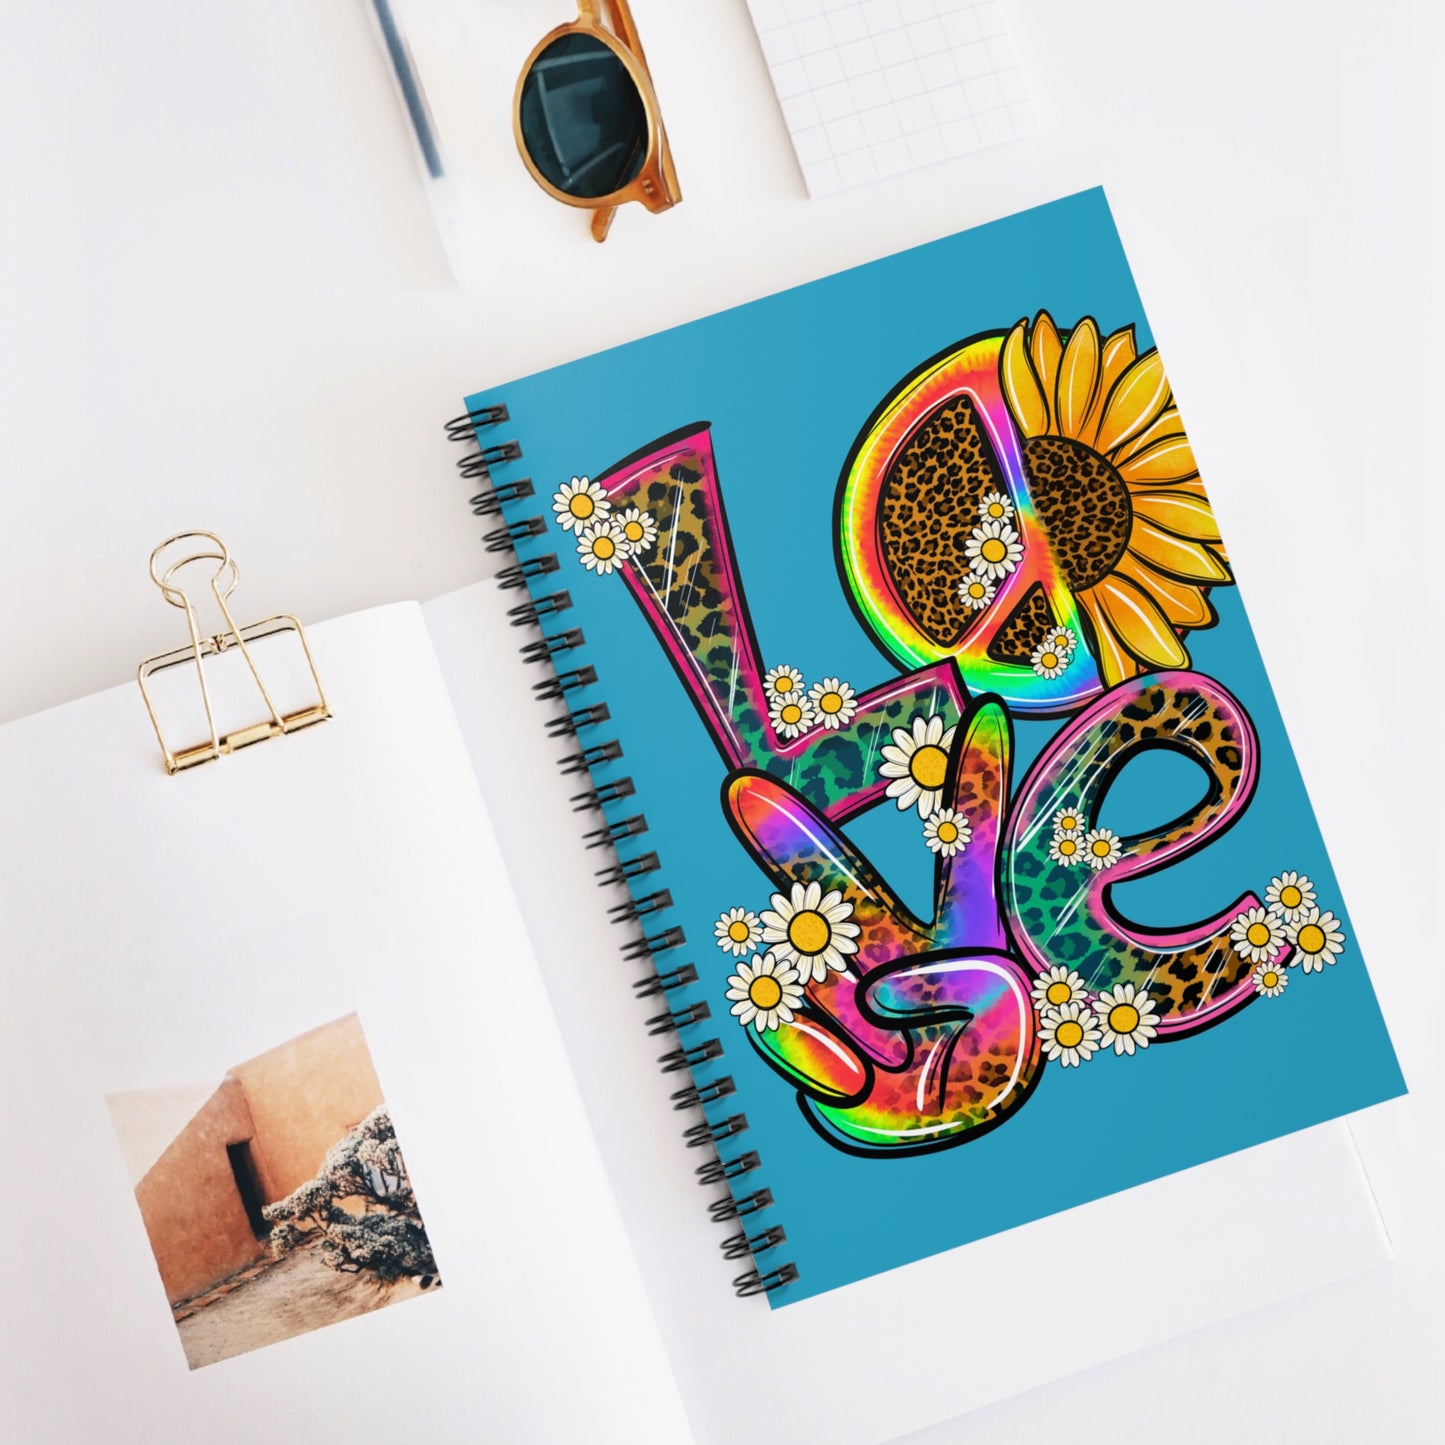 Psychedelic LOVE Flower: Spiral Notebook - Log Books - Journals - Diaries - and More Custom Printed by TheGlassyLass